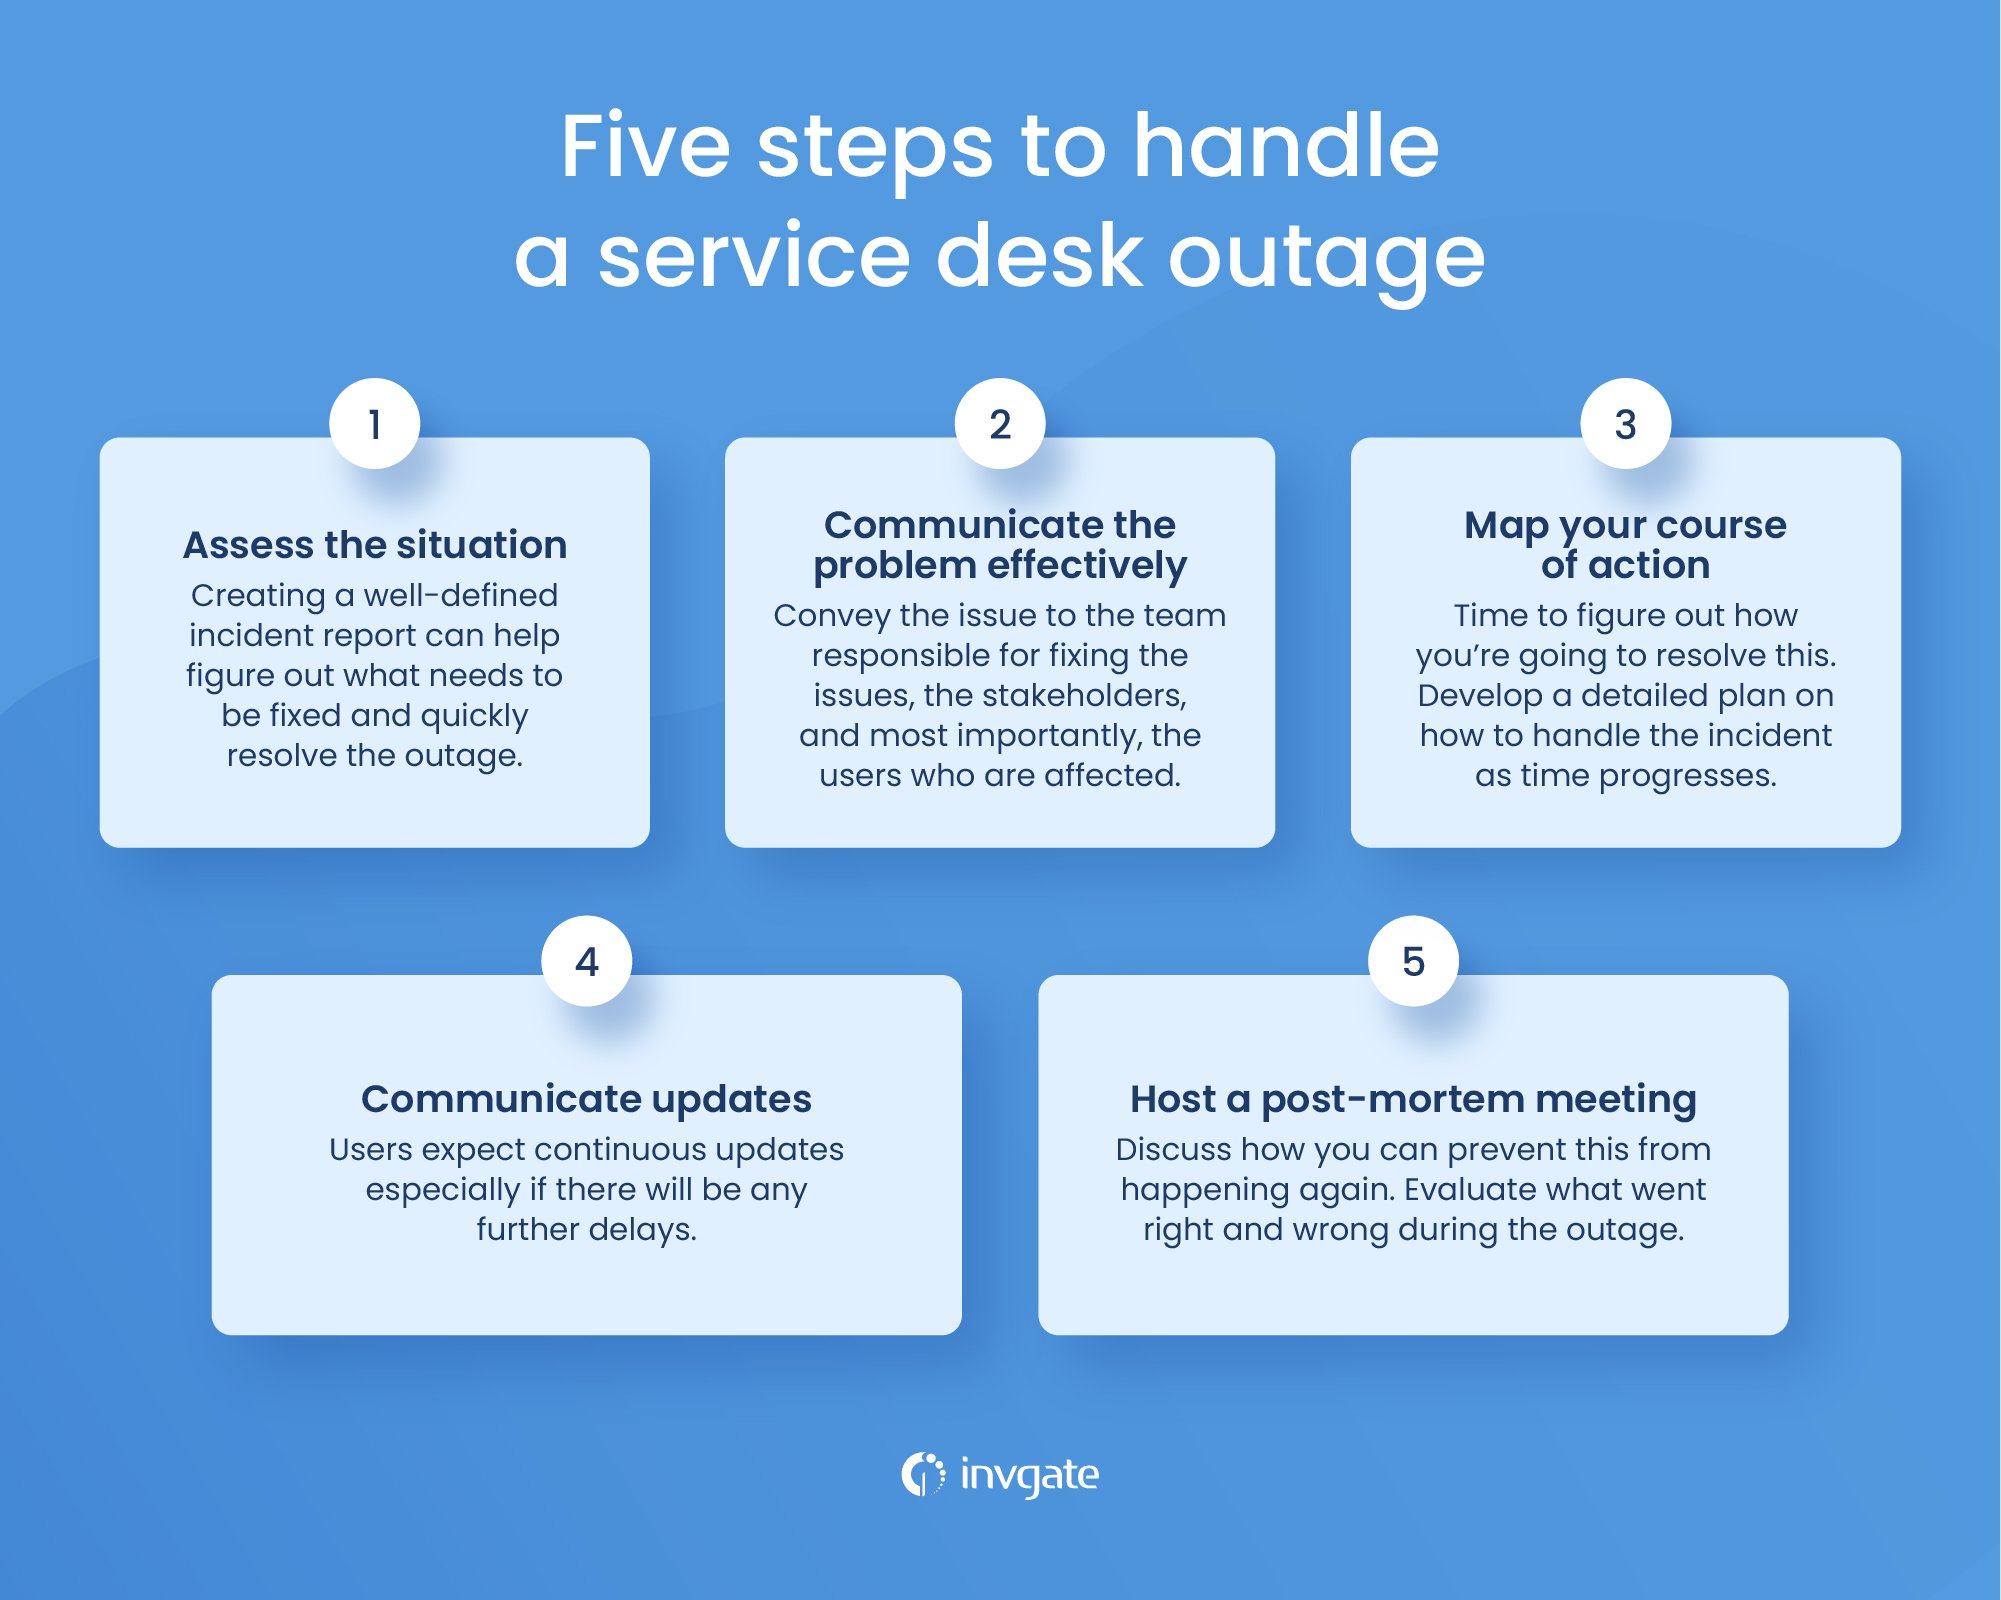 Quick step-by-step guide to handle a service desk outage.